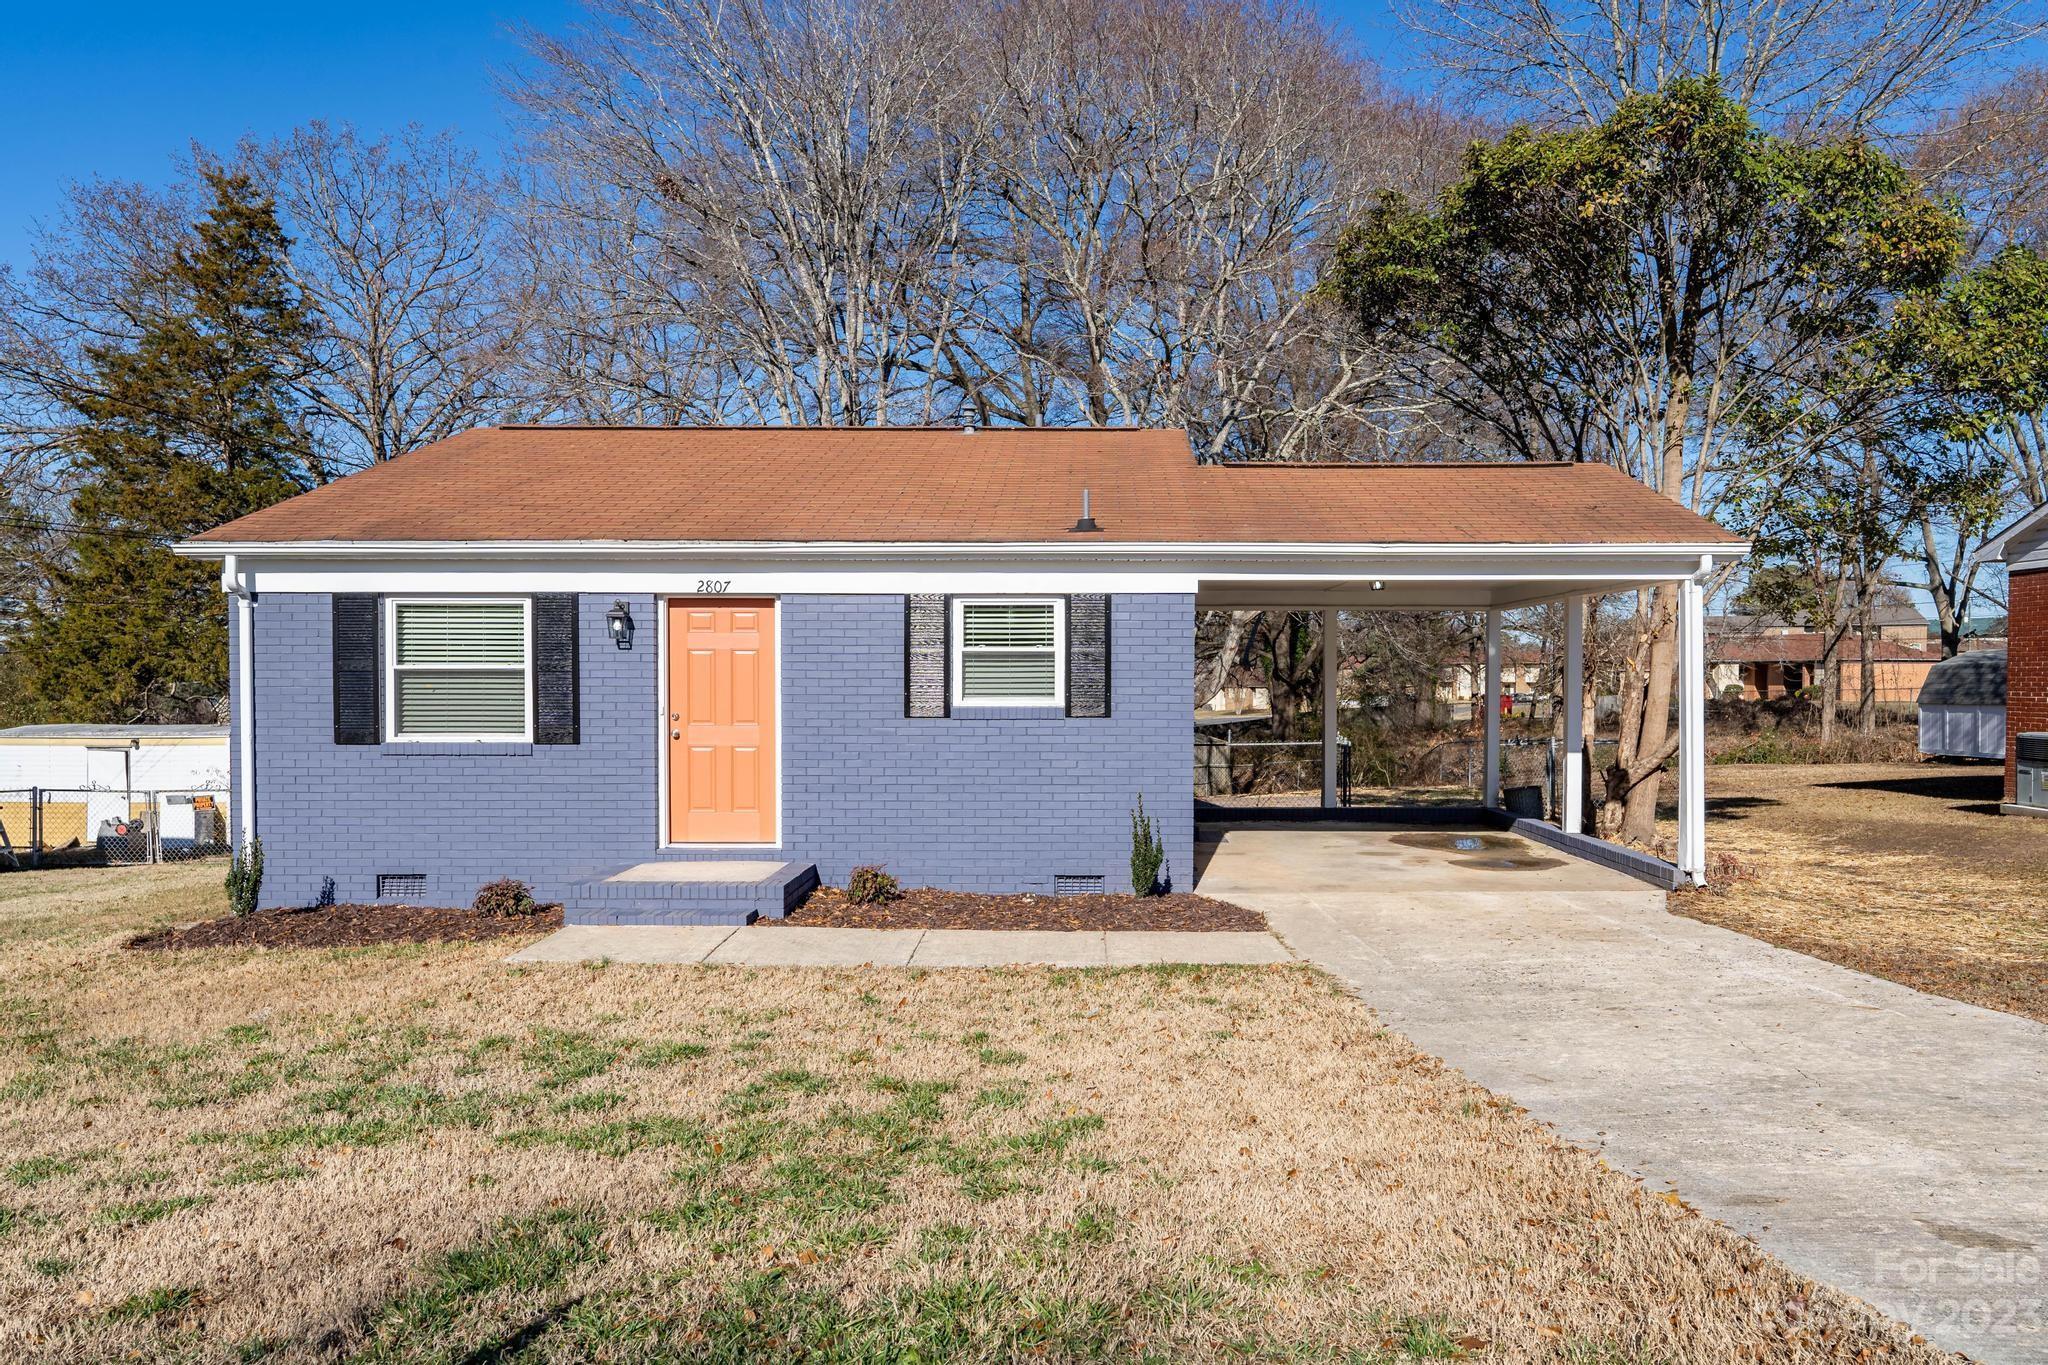 Photo one of 2807 Gail Ave Gastonia NC 28052 | MLS 4090262